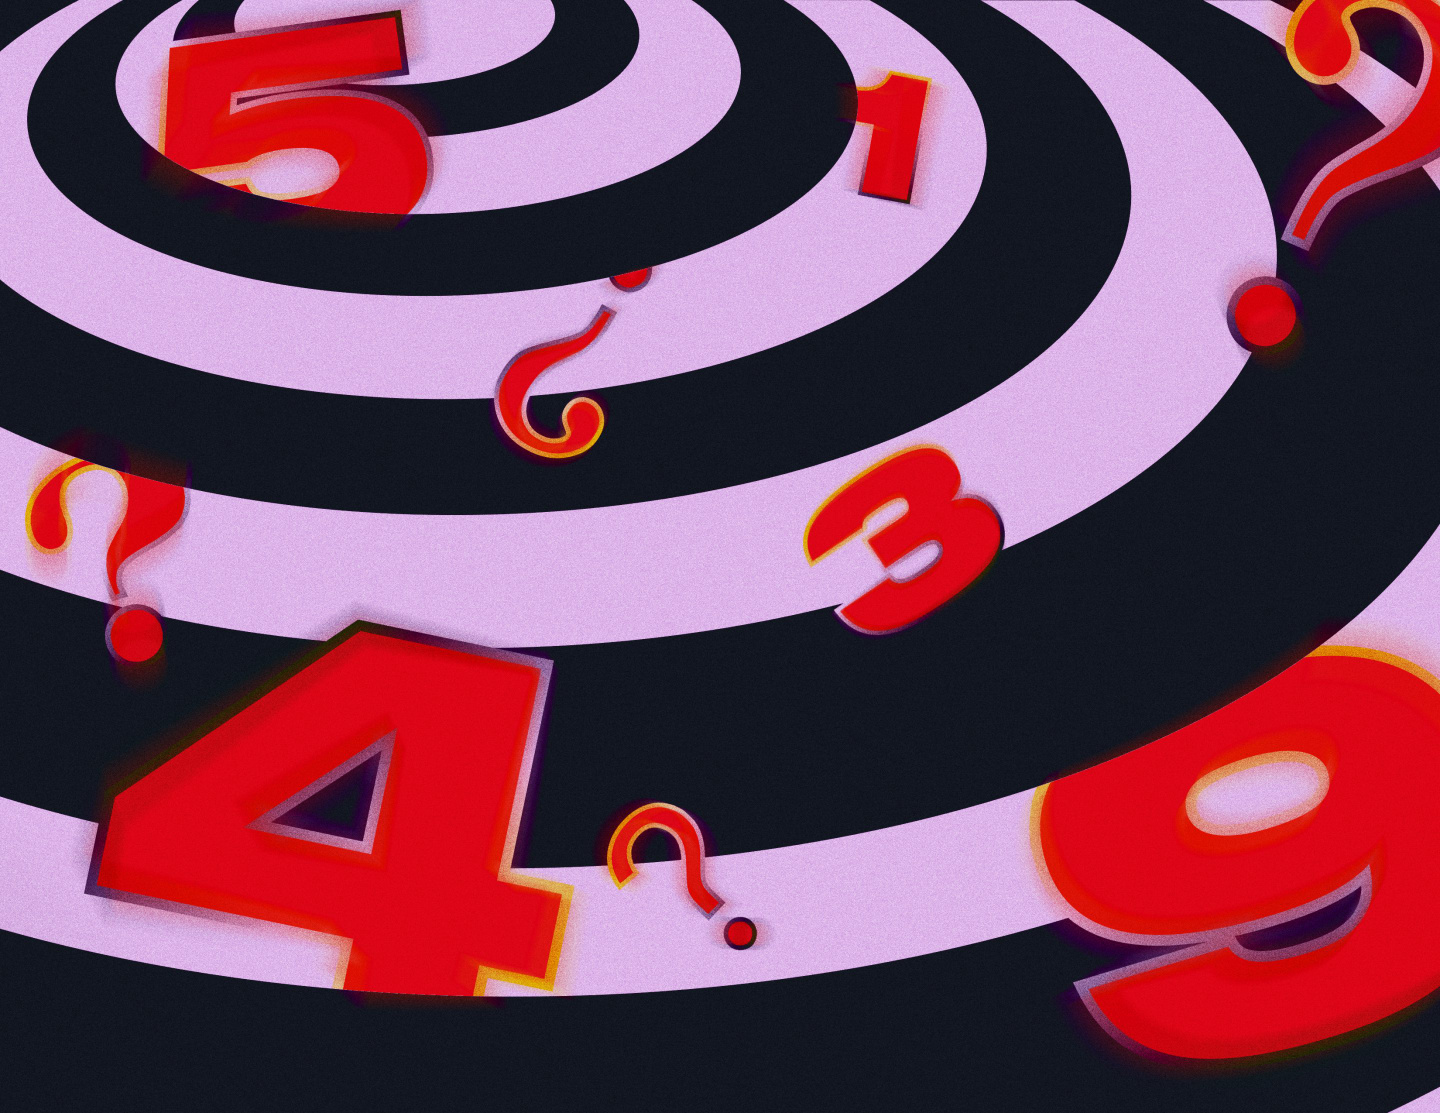 Why you’re about to get super into numerology